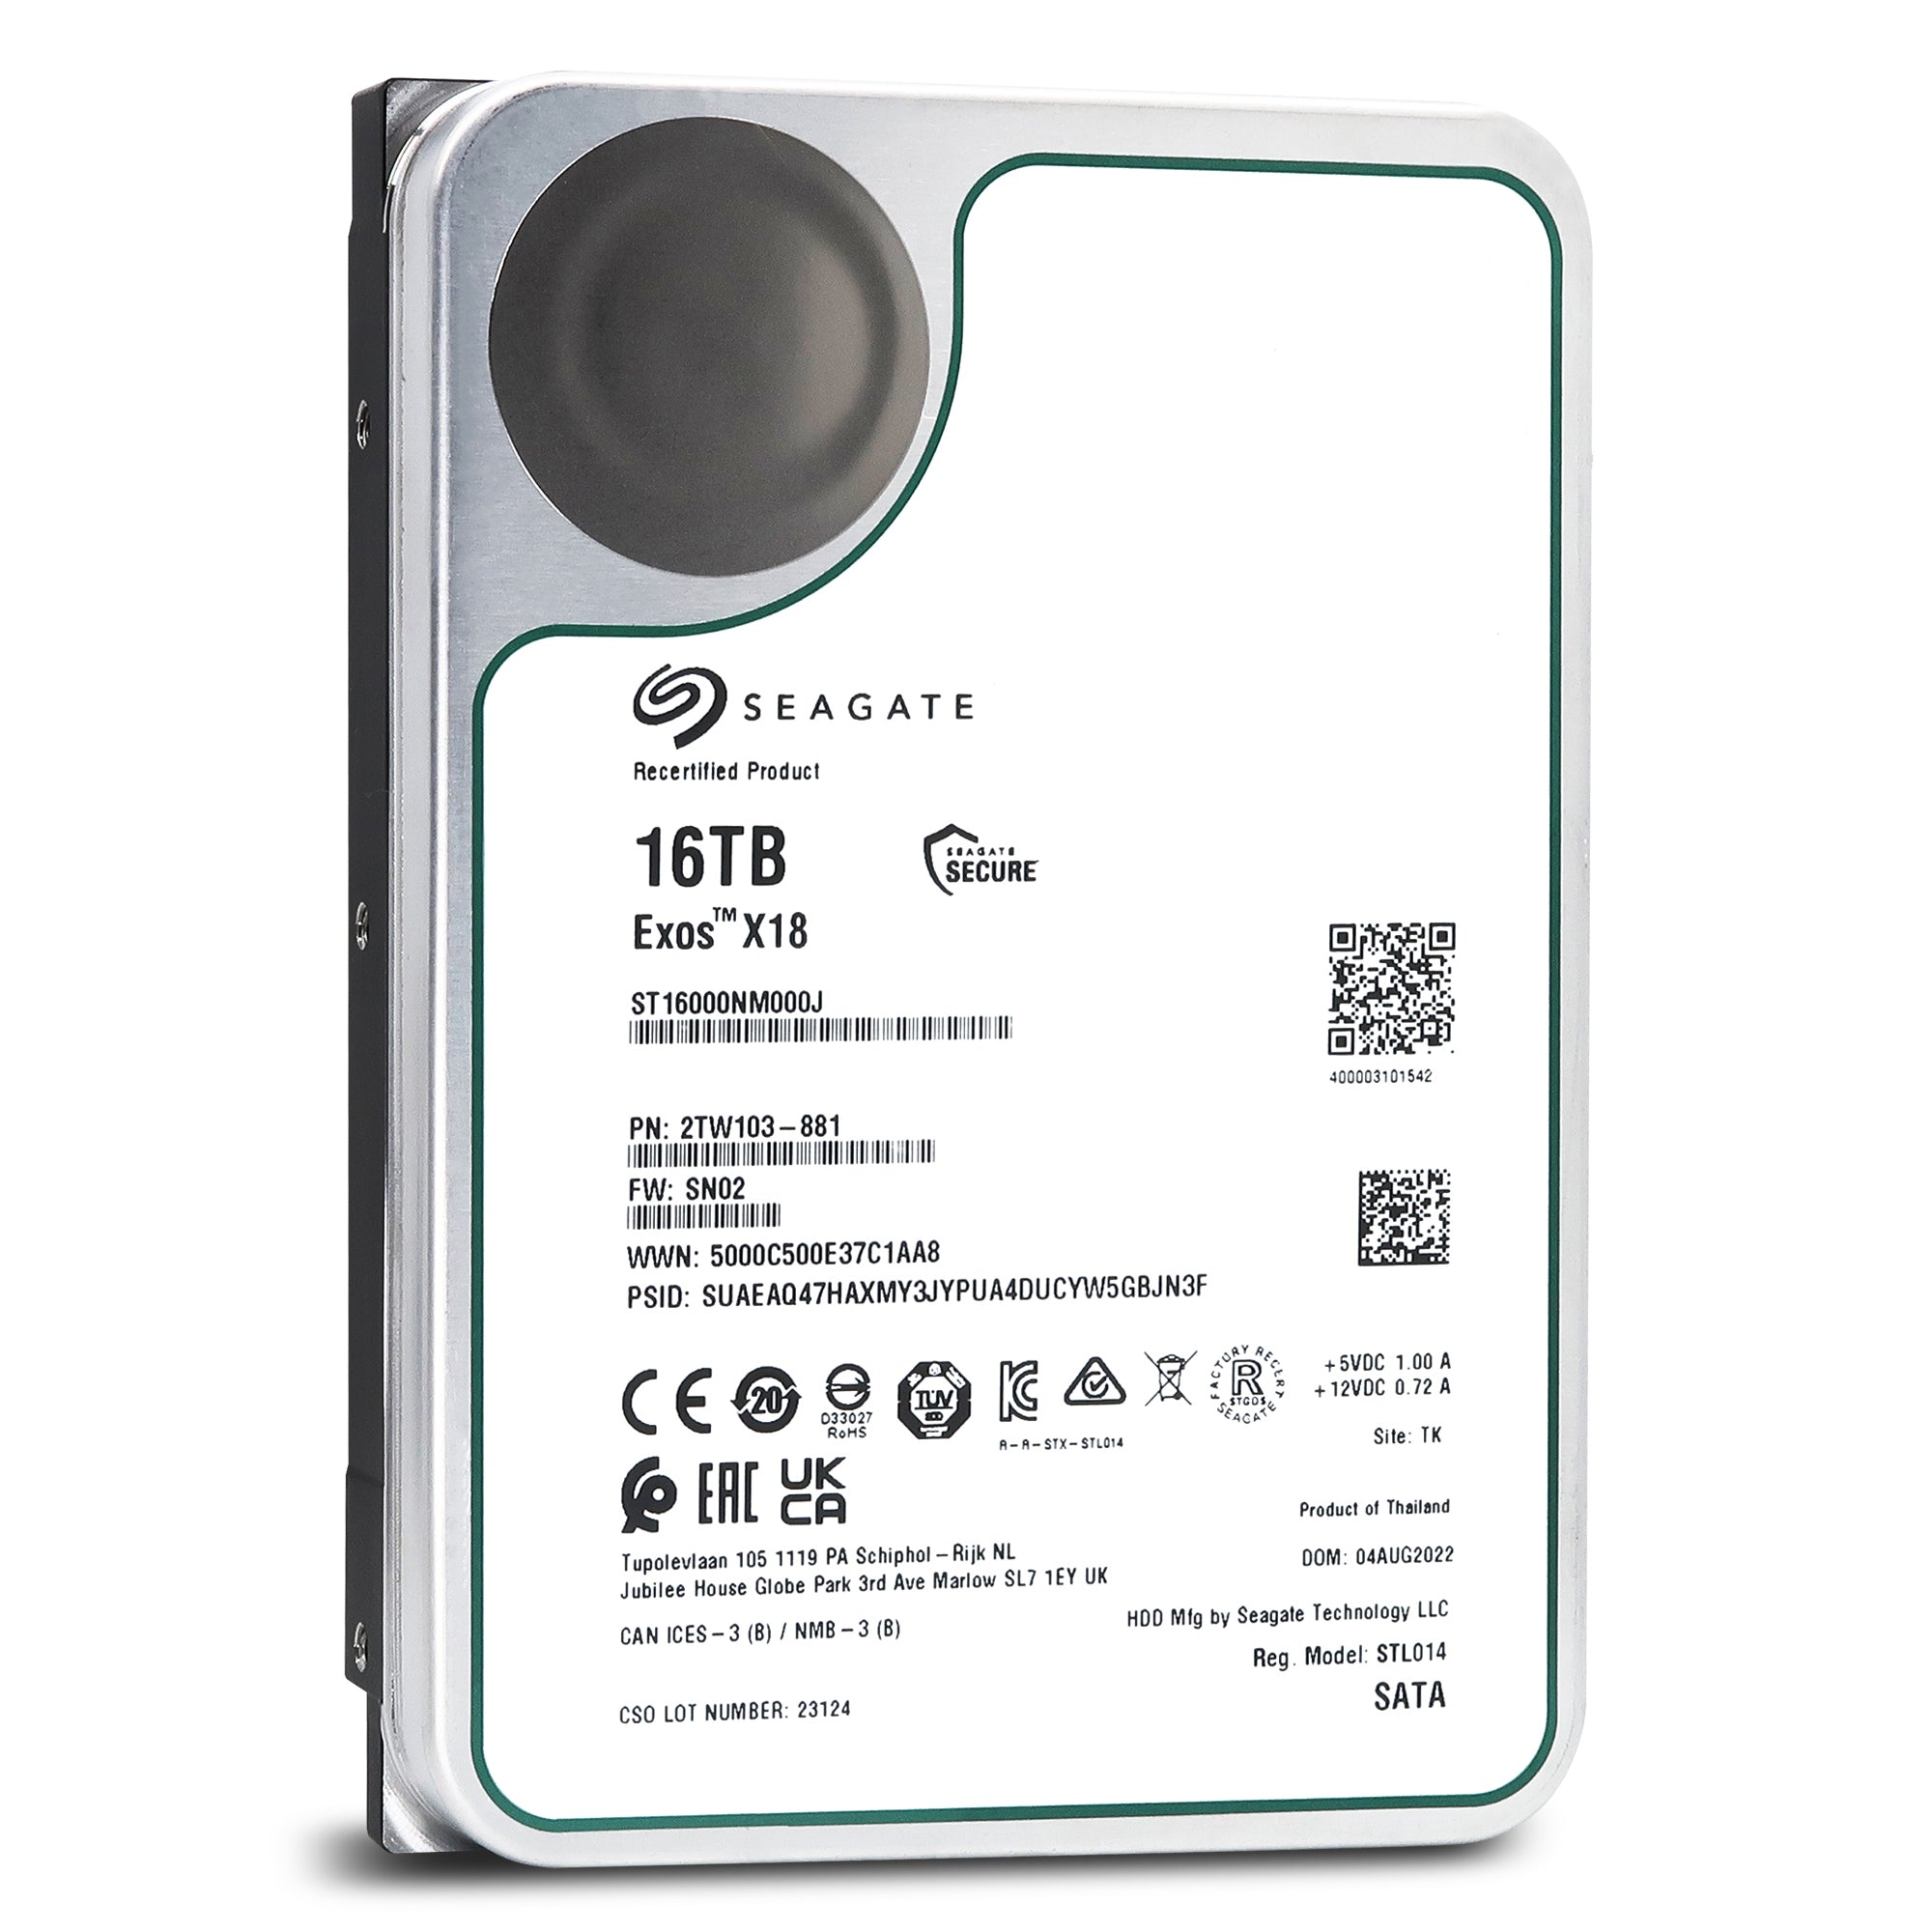 Seagate Exos X18 ST16000NM000J 16TB 7.2K RPM SATA 6Gb/s 3.5in Recertified Hard Drive - Front View